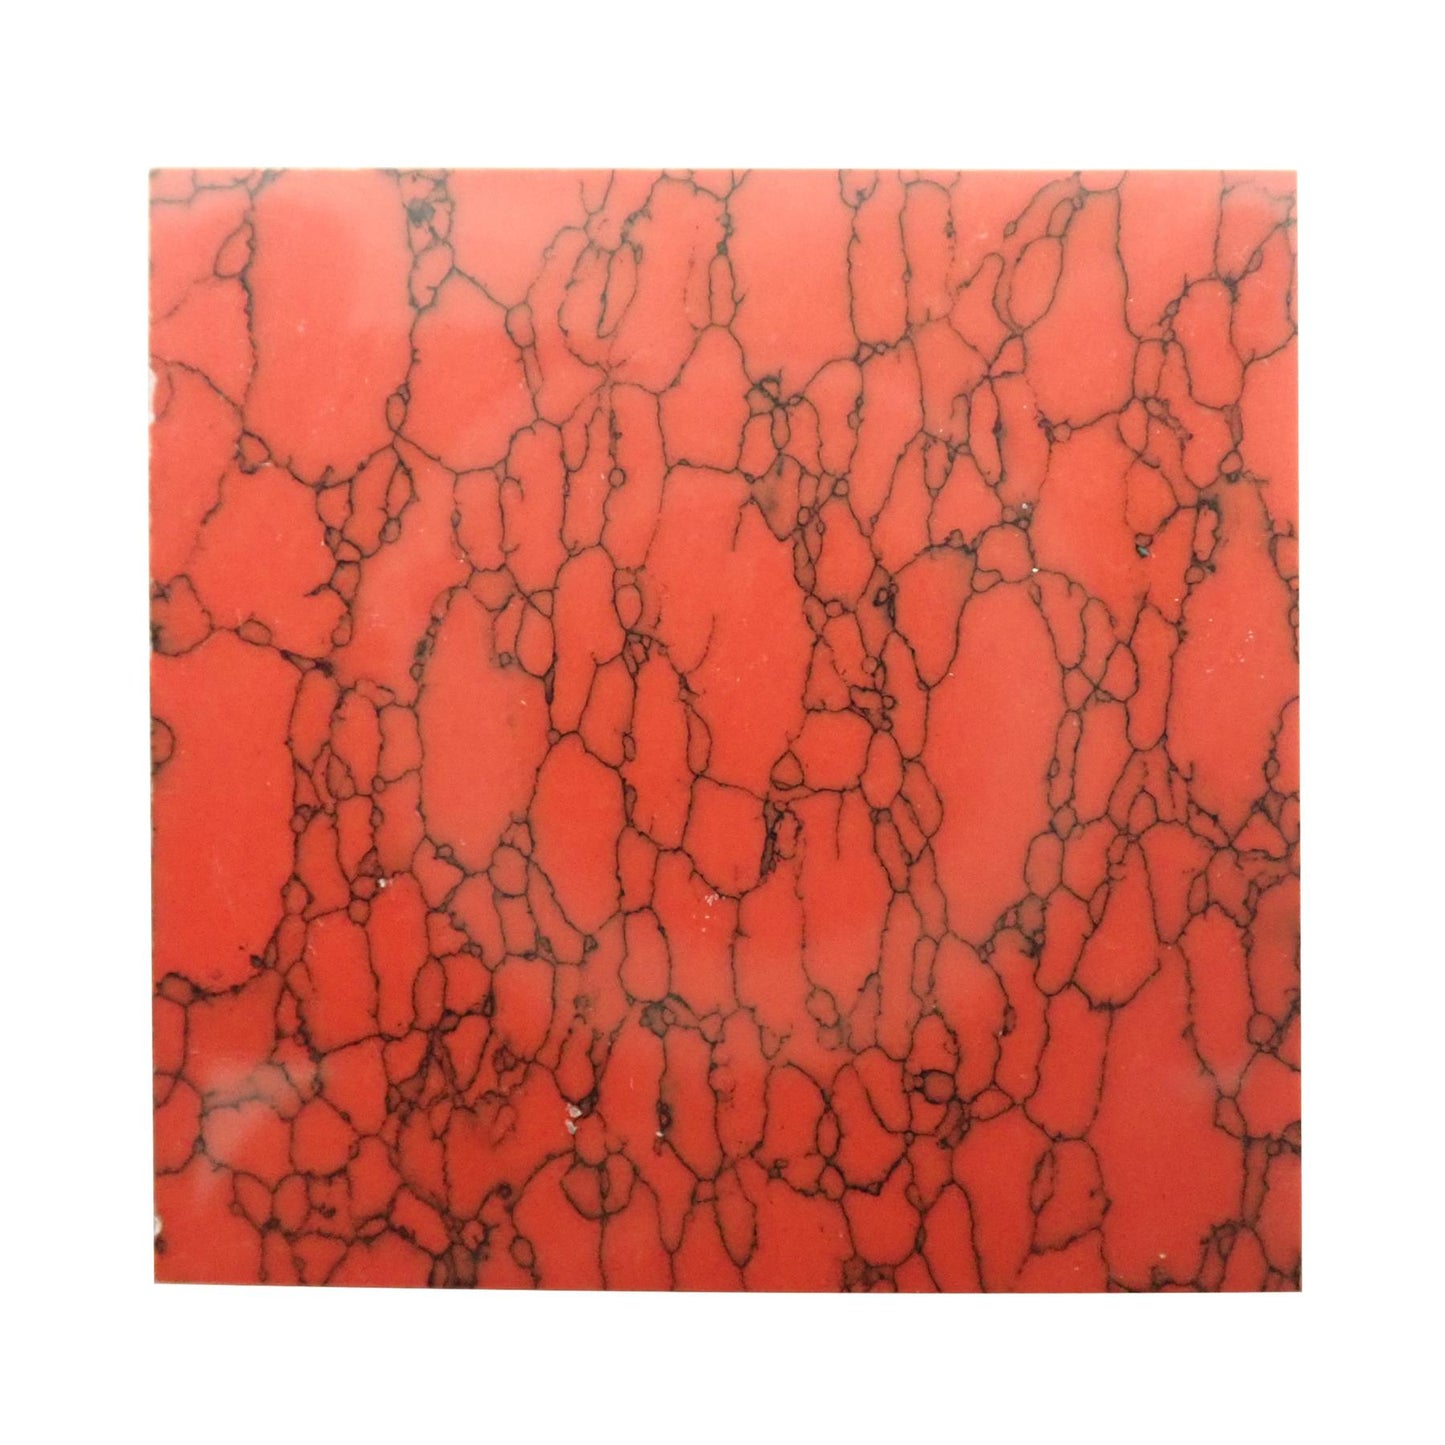 Incudo A "Bloody Basin" Marble Jasper Reconstituted Stone Inlay Blank - 50x50x3mm (2x1.97x0.12")